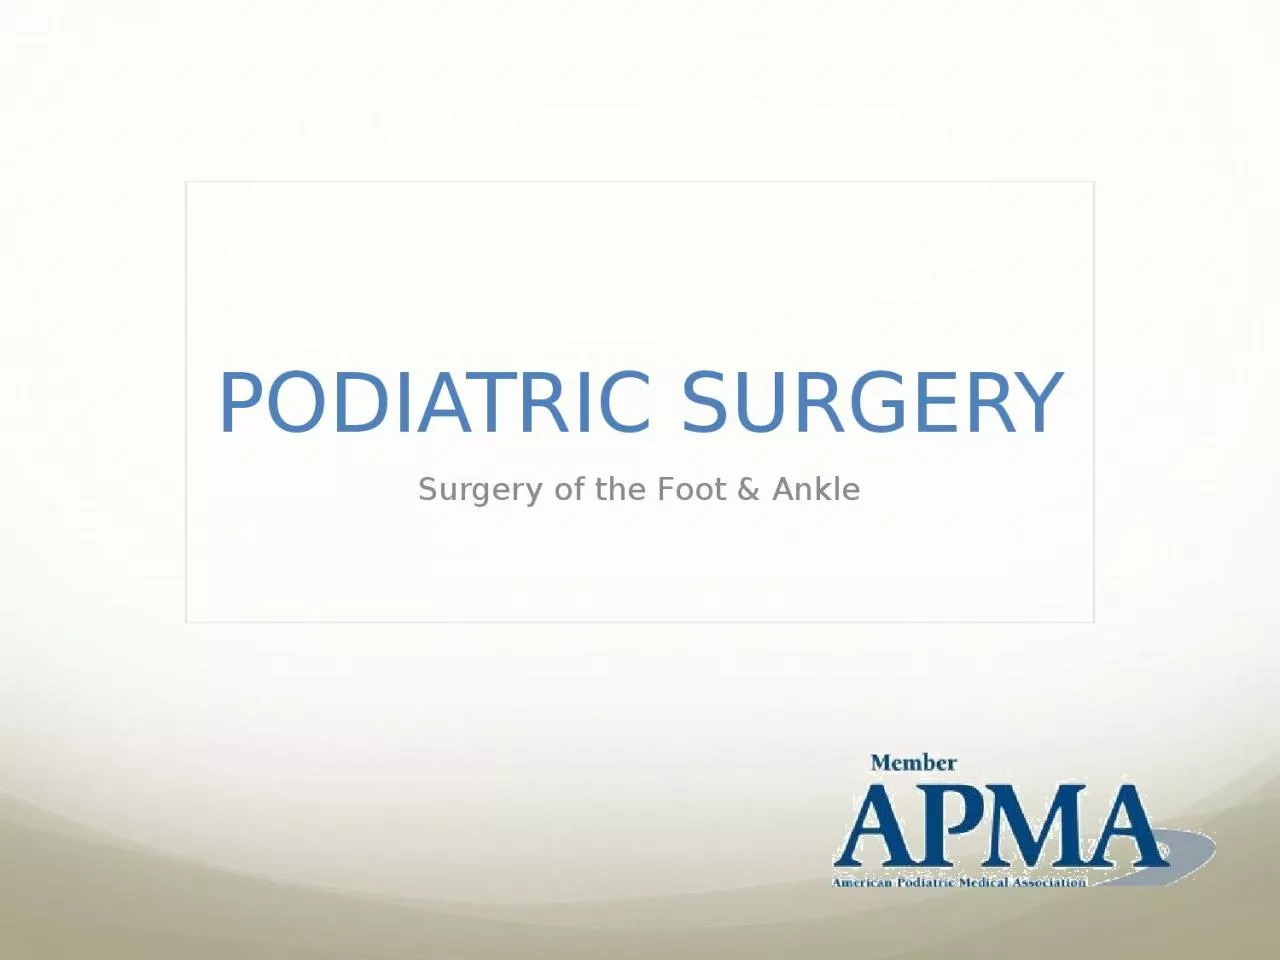 PODIATRIC SURGERY Surgery of the Foot & Ankle